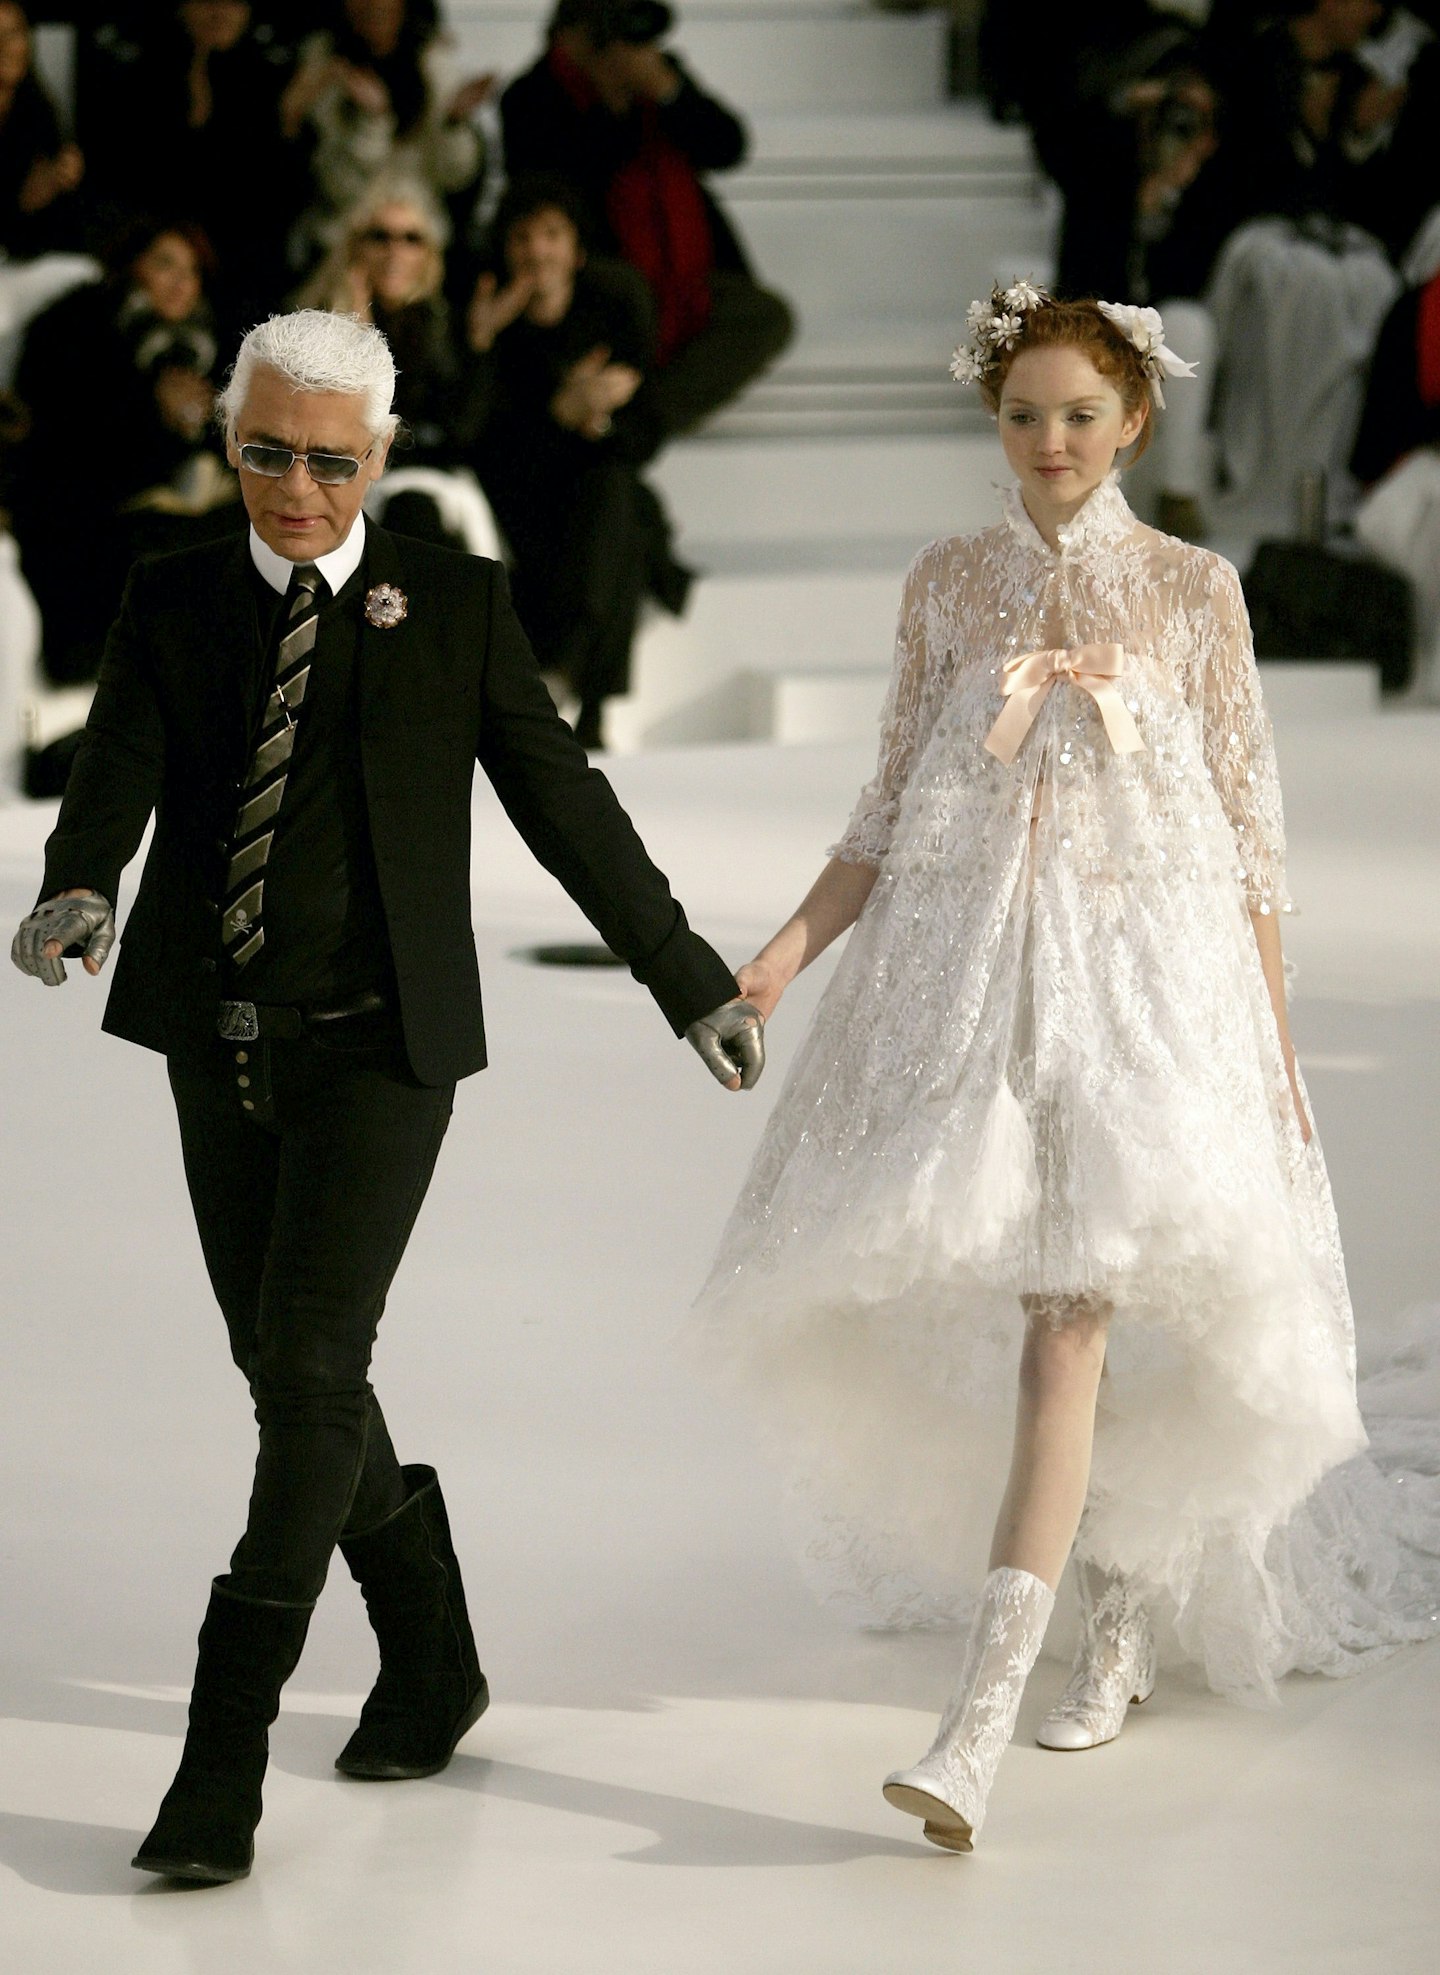 Chanel exhibition catwalk moments Karl Lagerfeld and Lily Cole in The Chanel Fall 2006 Finale